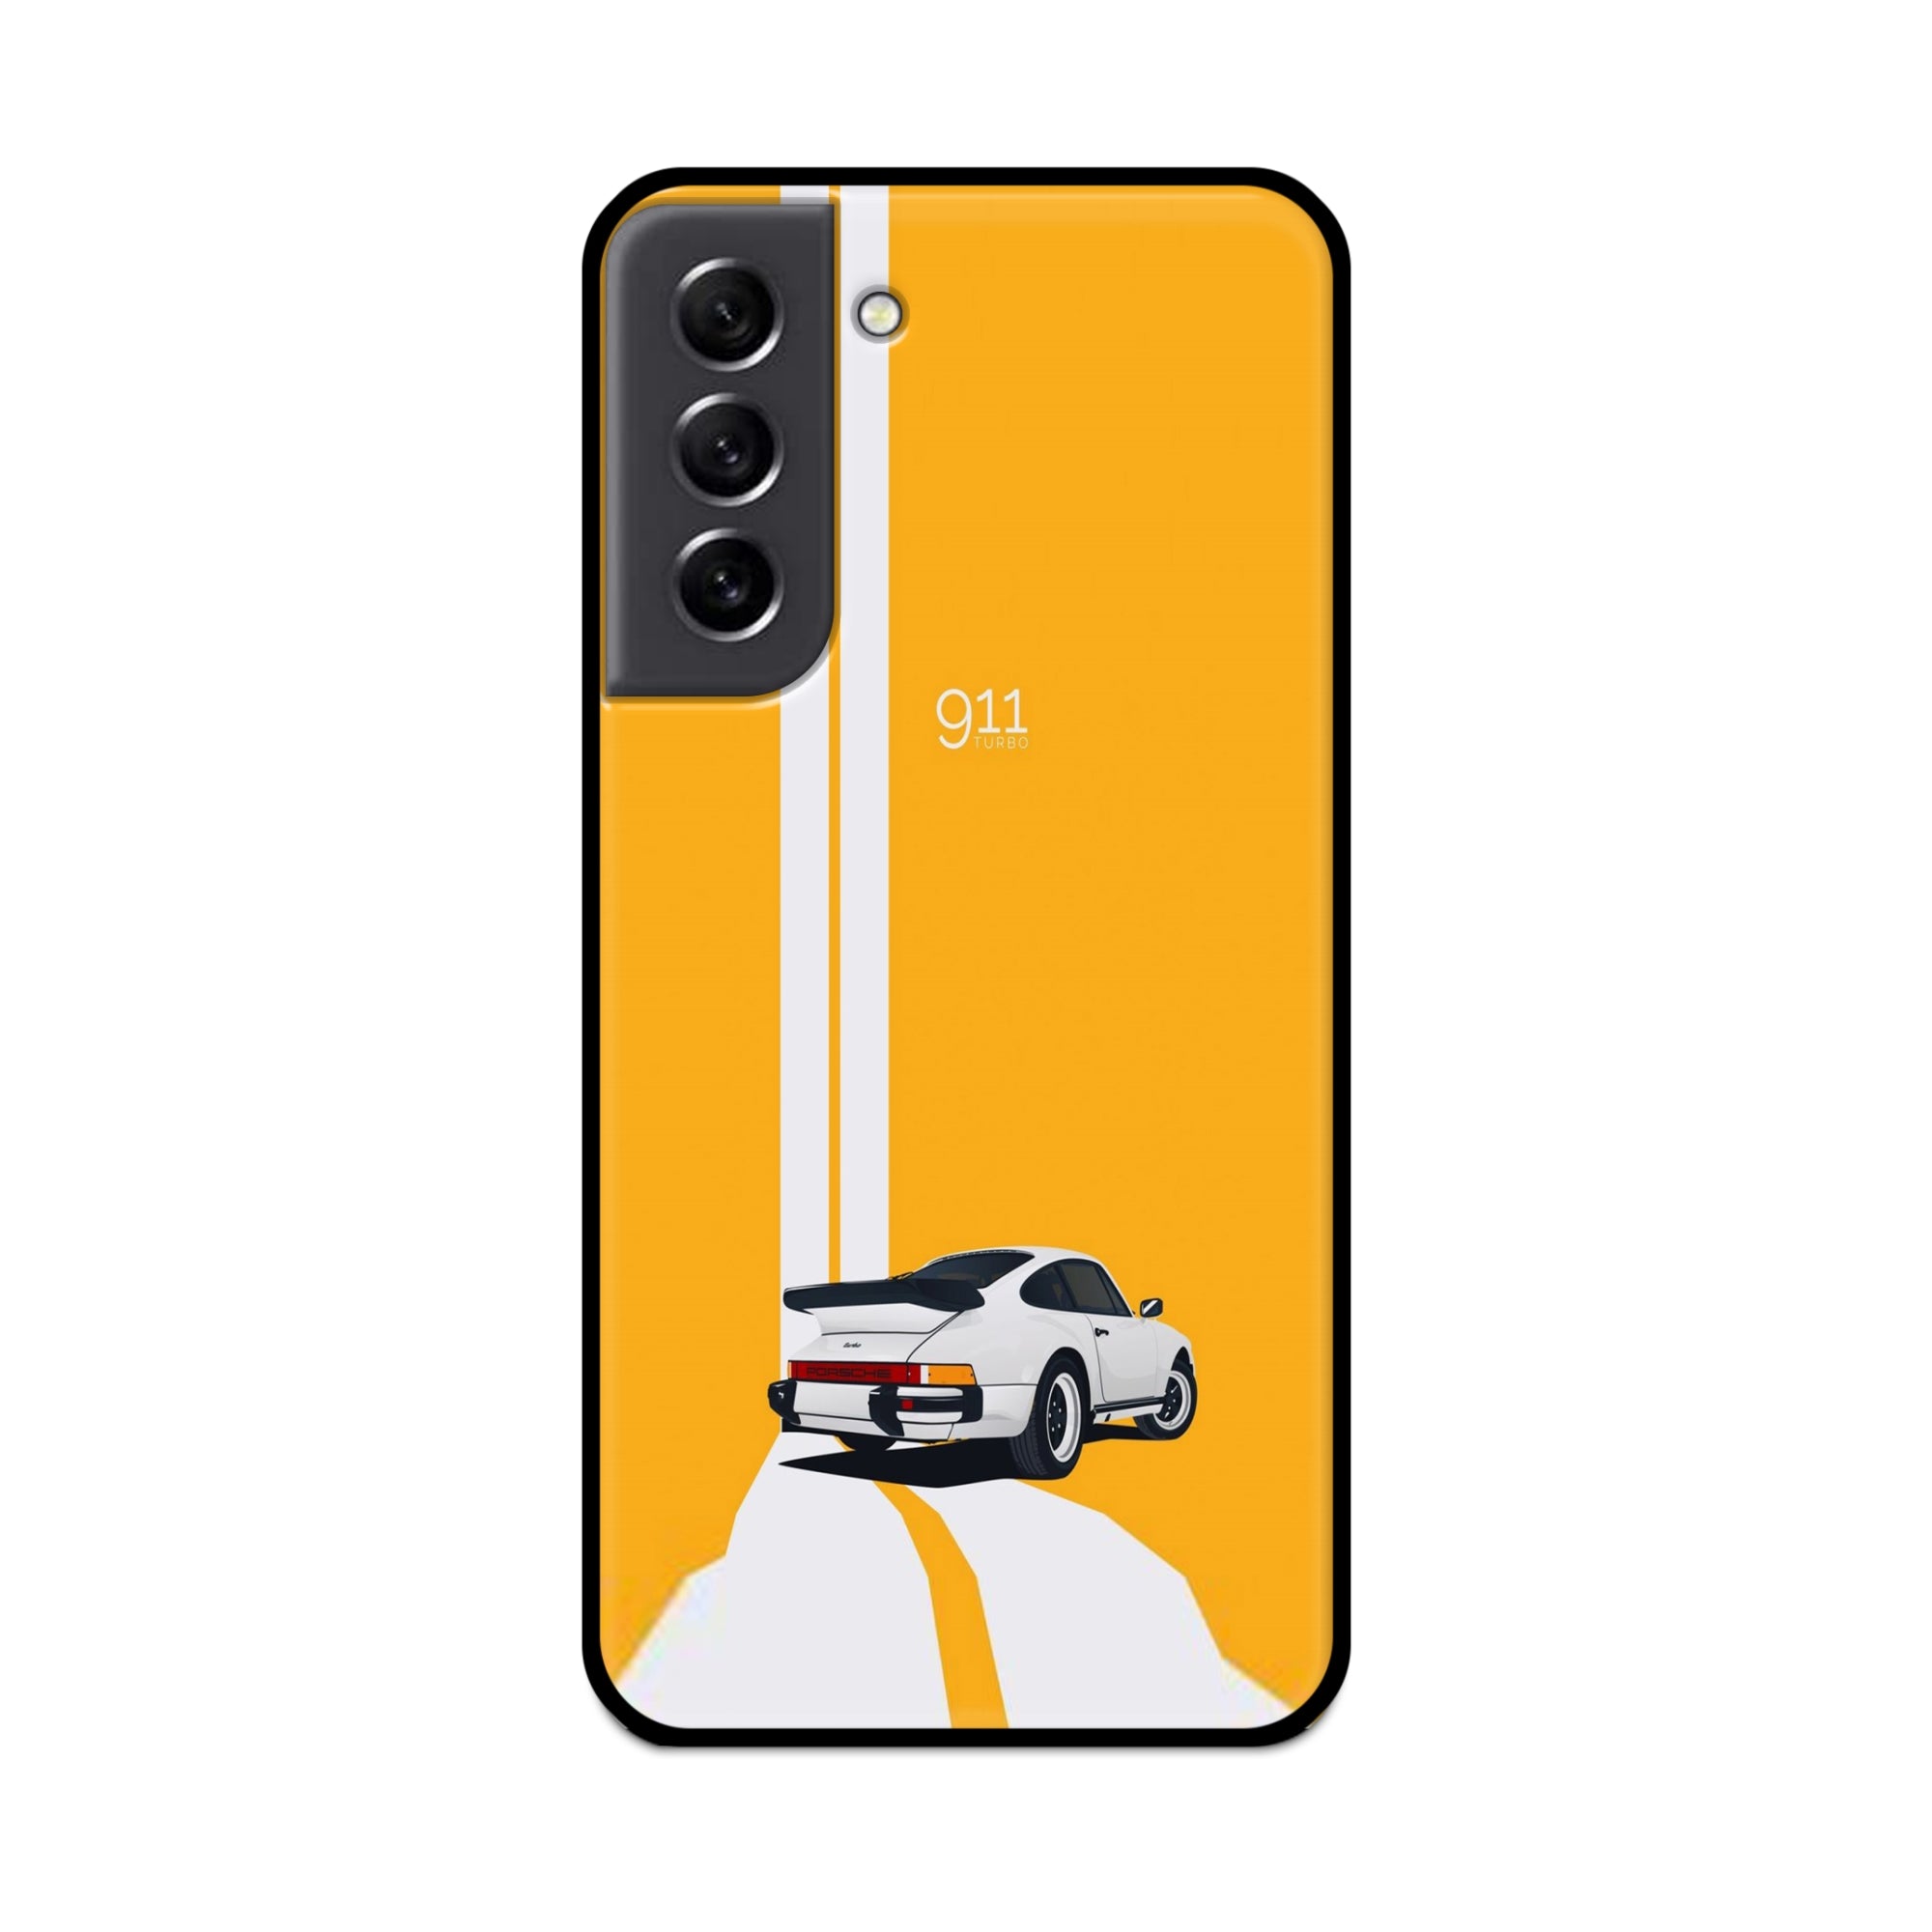 Buy 911 Gt Porche Metal-Silicon Back Mobile Phone Case/Cover For Samsung S21 FE Online